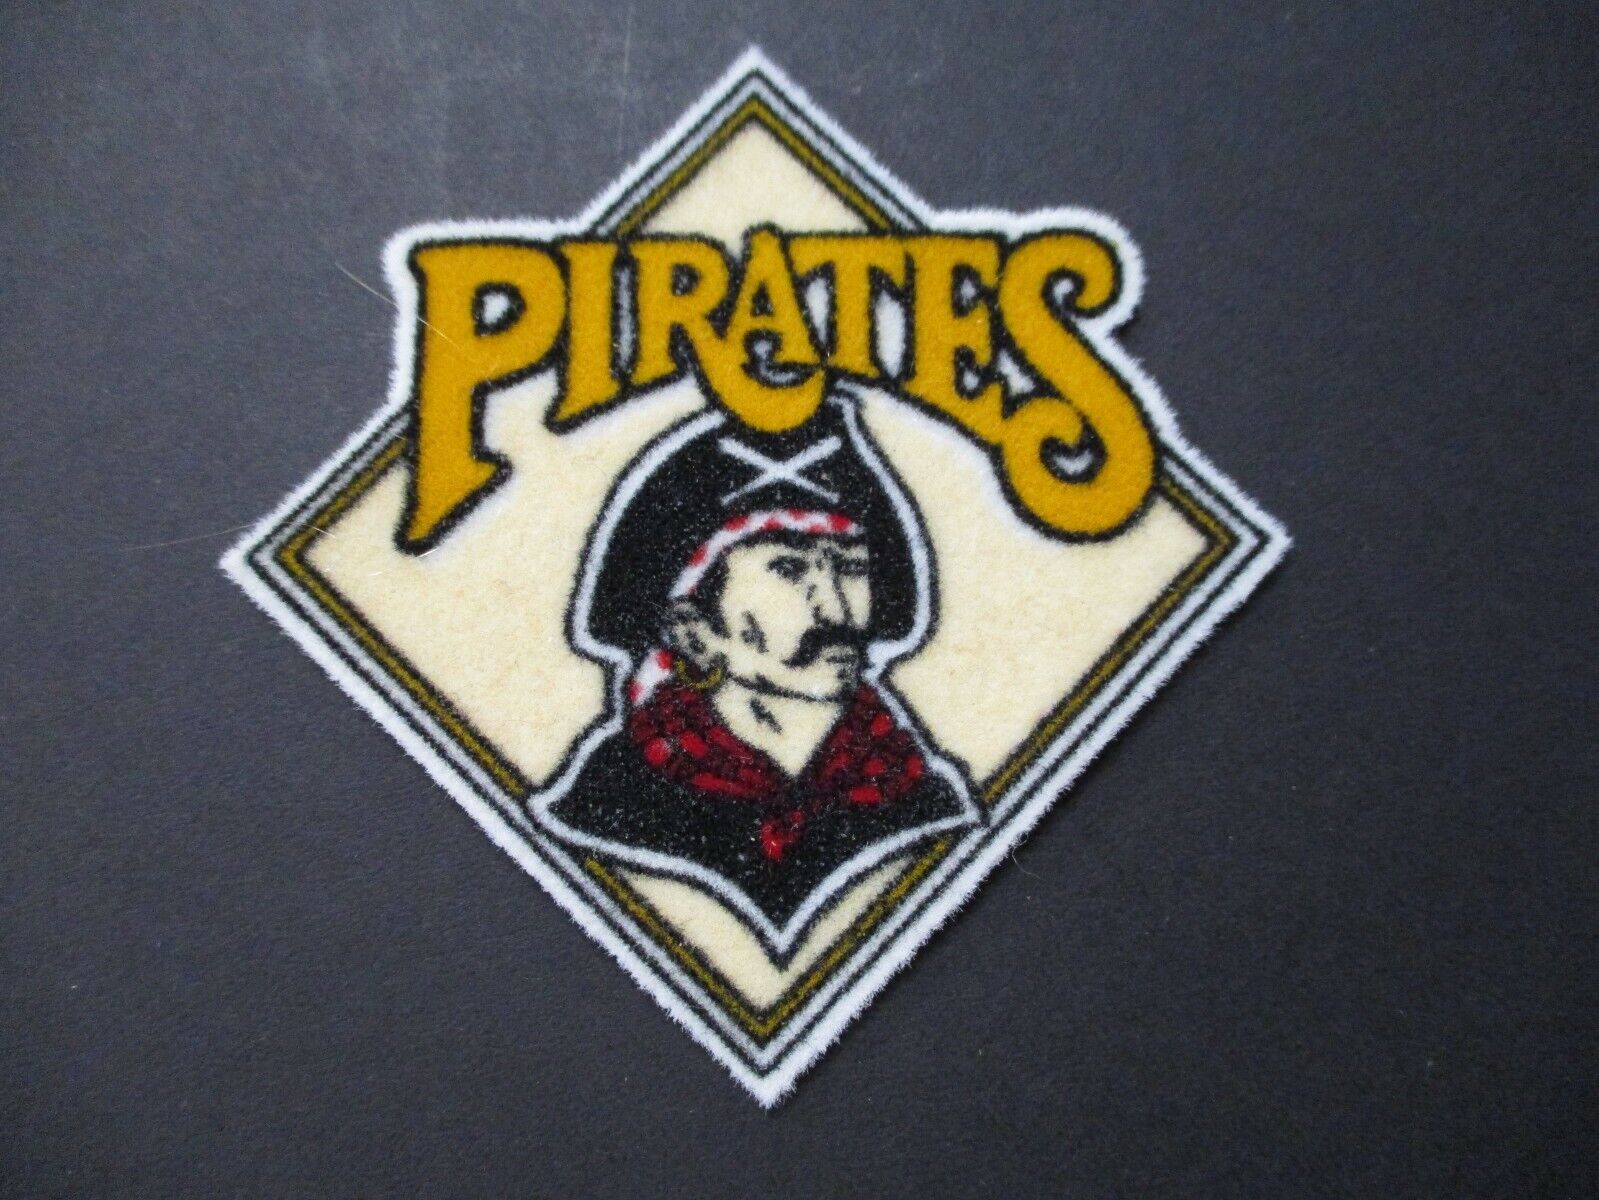 Pittsburgh Pirates Felt Patch Size 3 x 3 Inches Flimsy Light